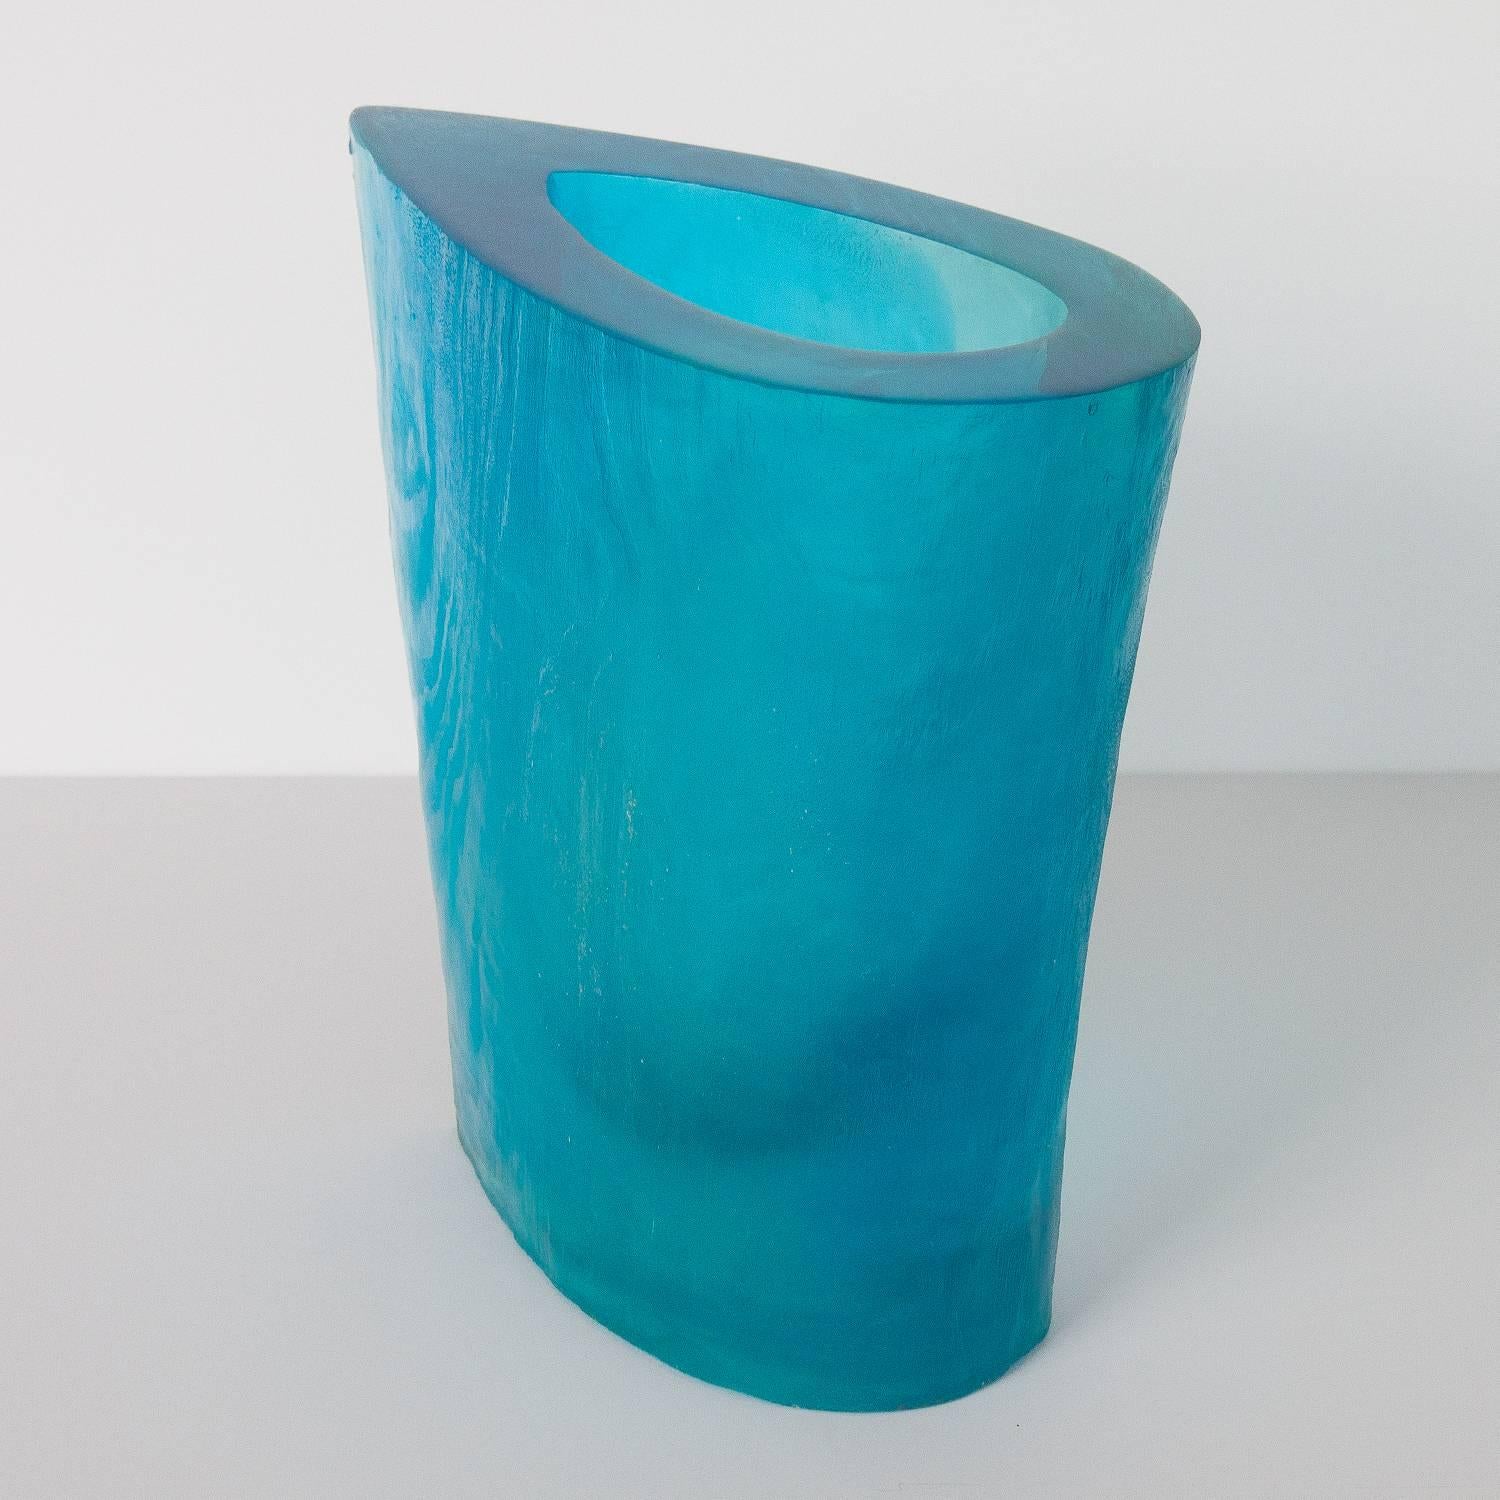 Hand-Crafted Terry Balle Resin Sculpture Vase